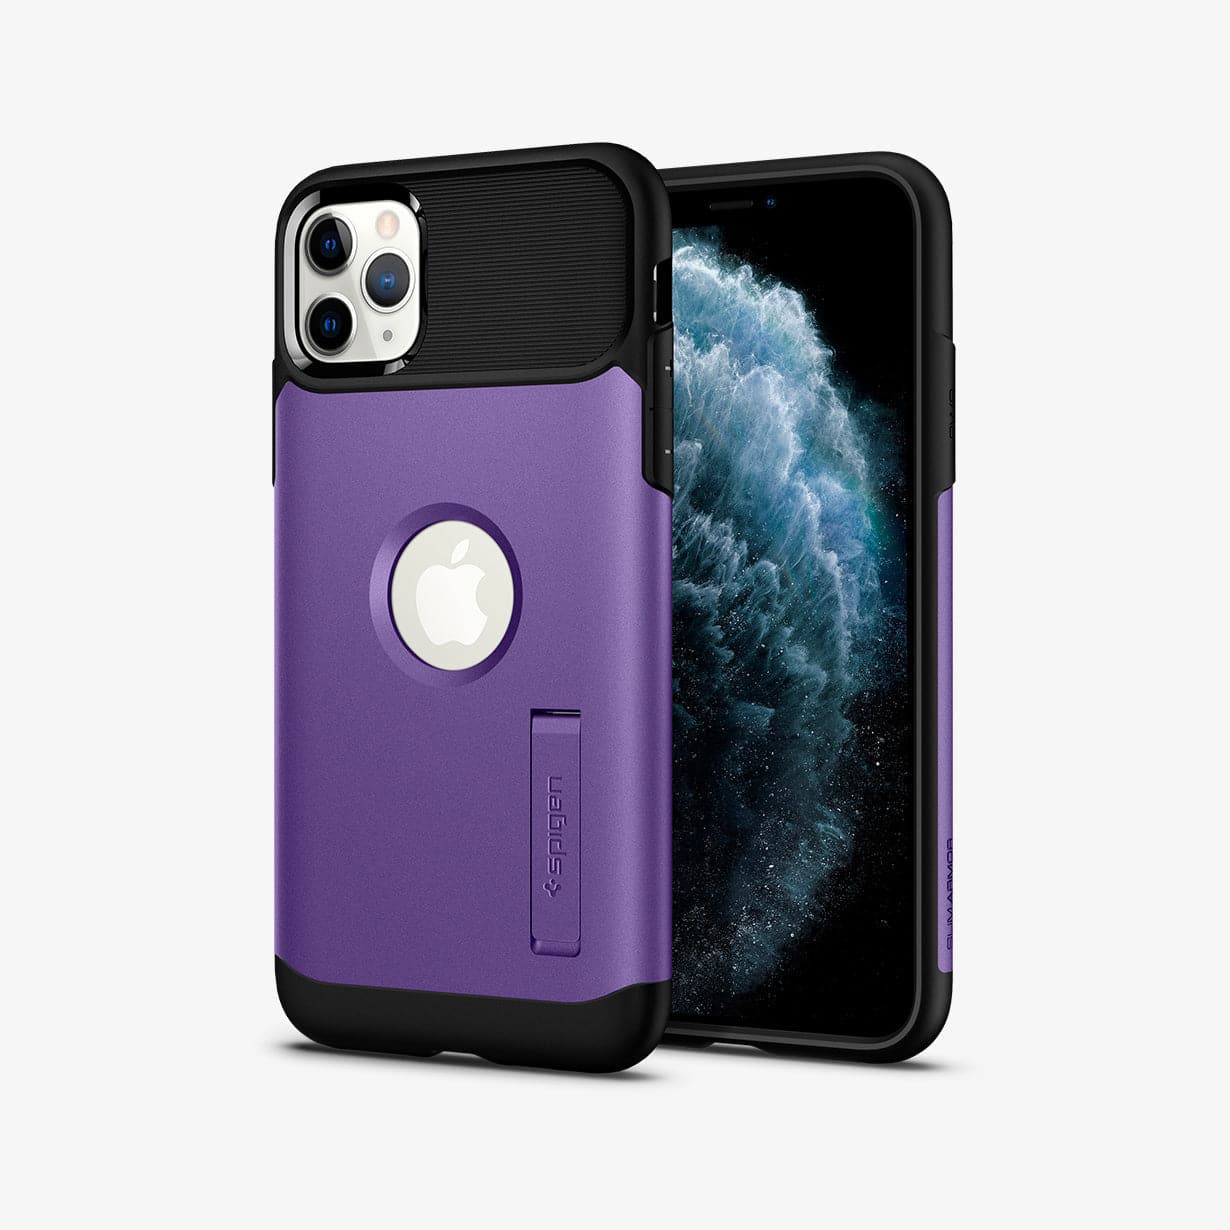 077CS27110 - iPhone 11 Pro Case Slim Armor in purple showing the back and front